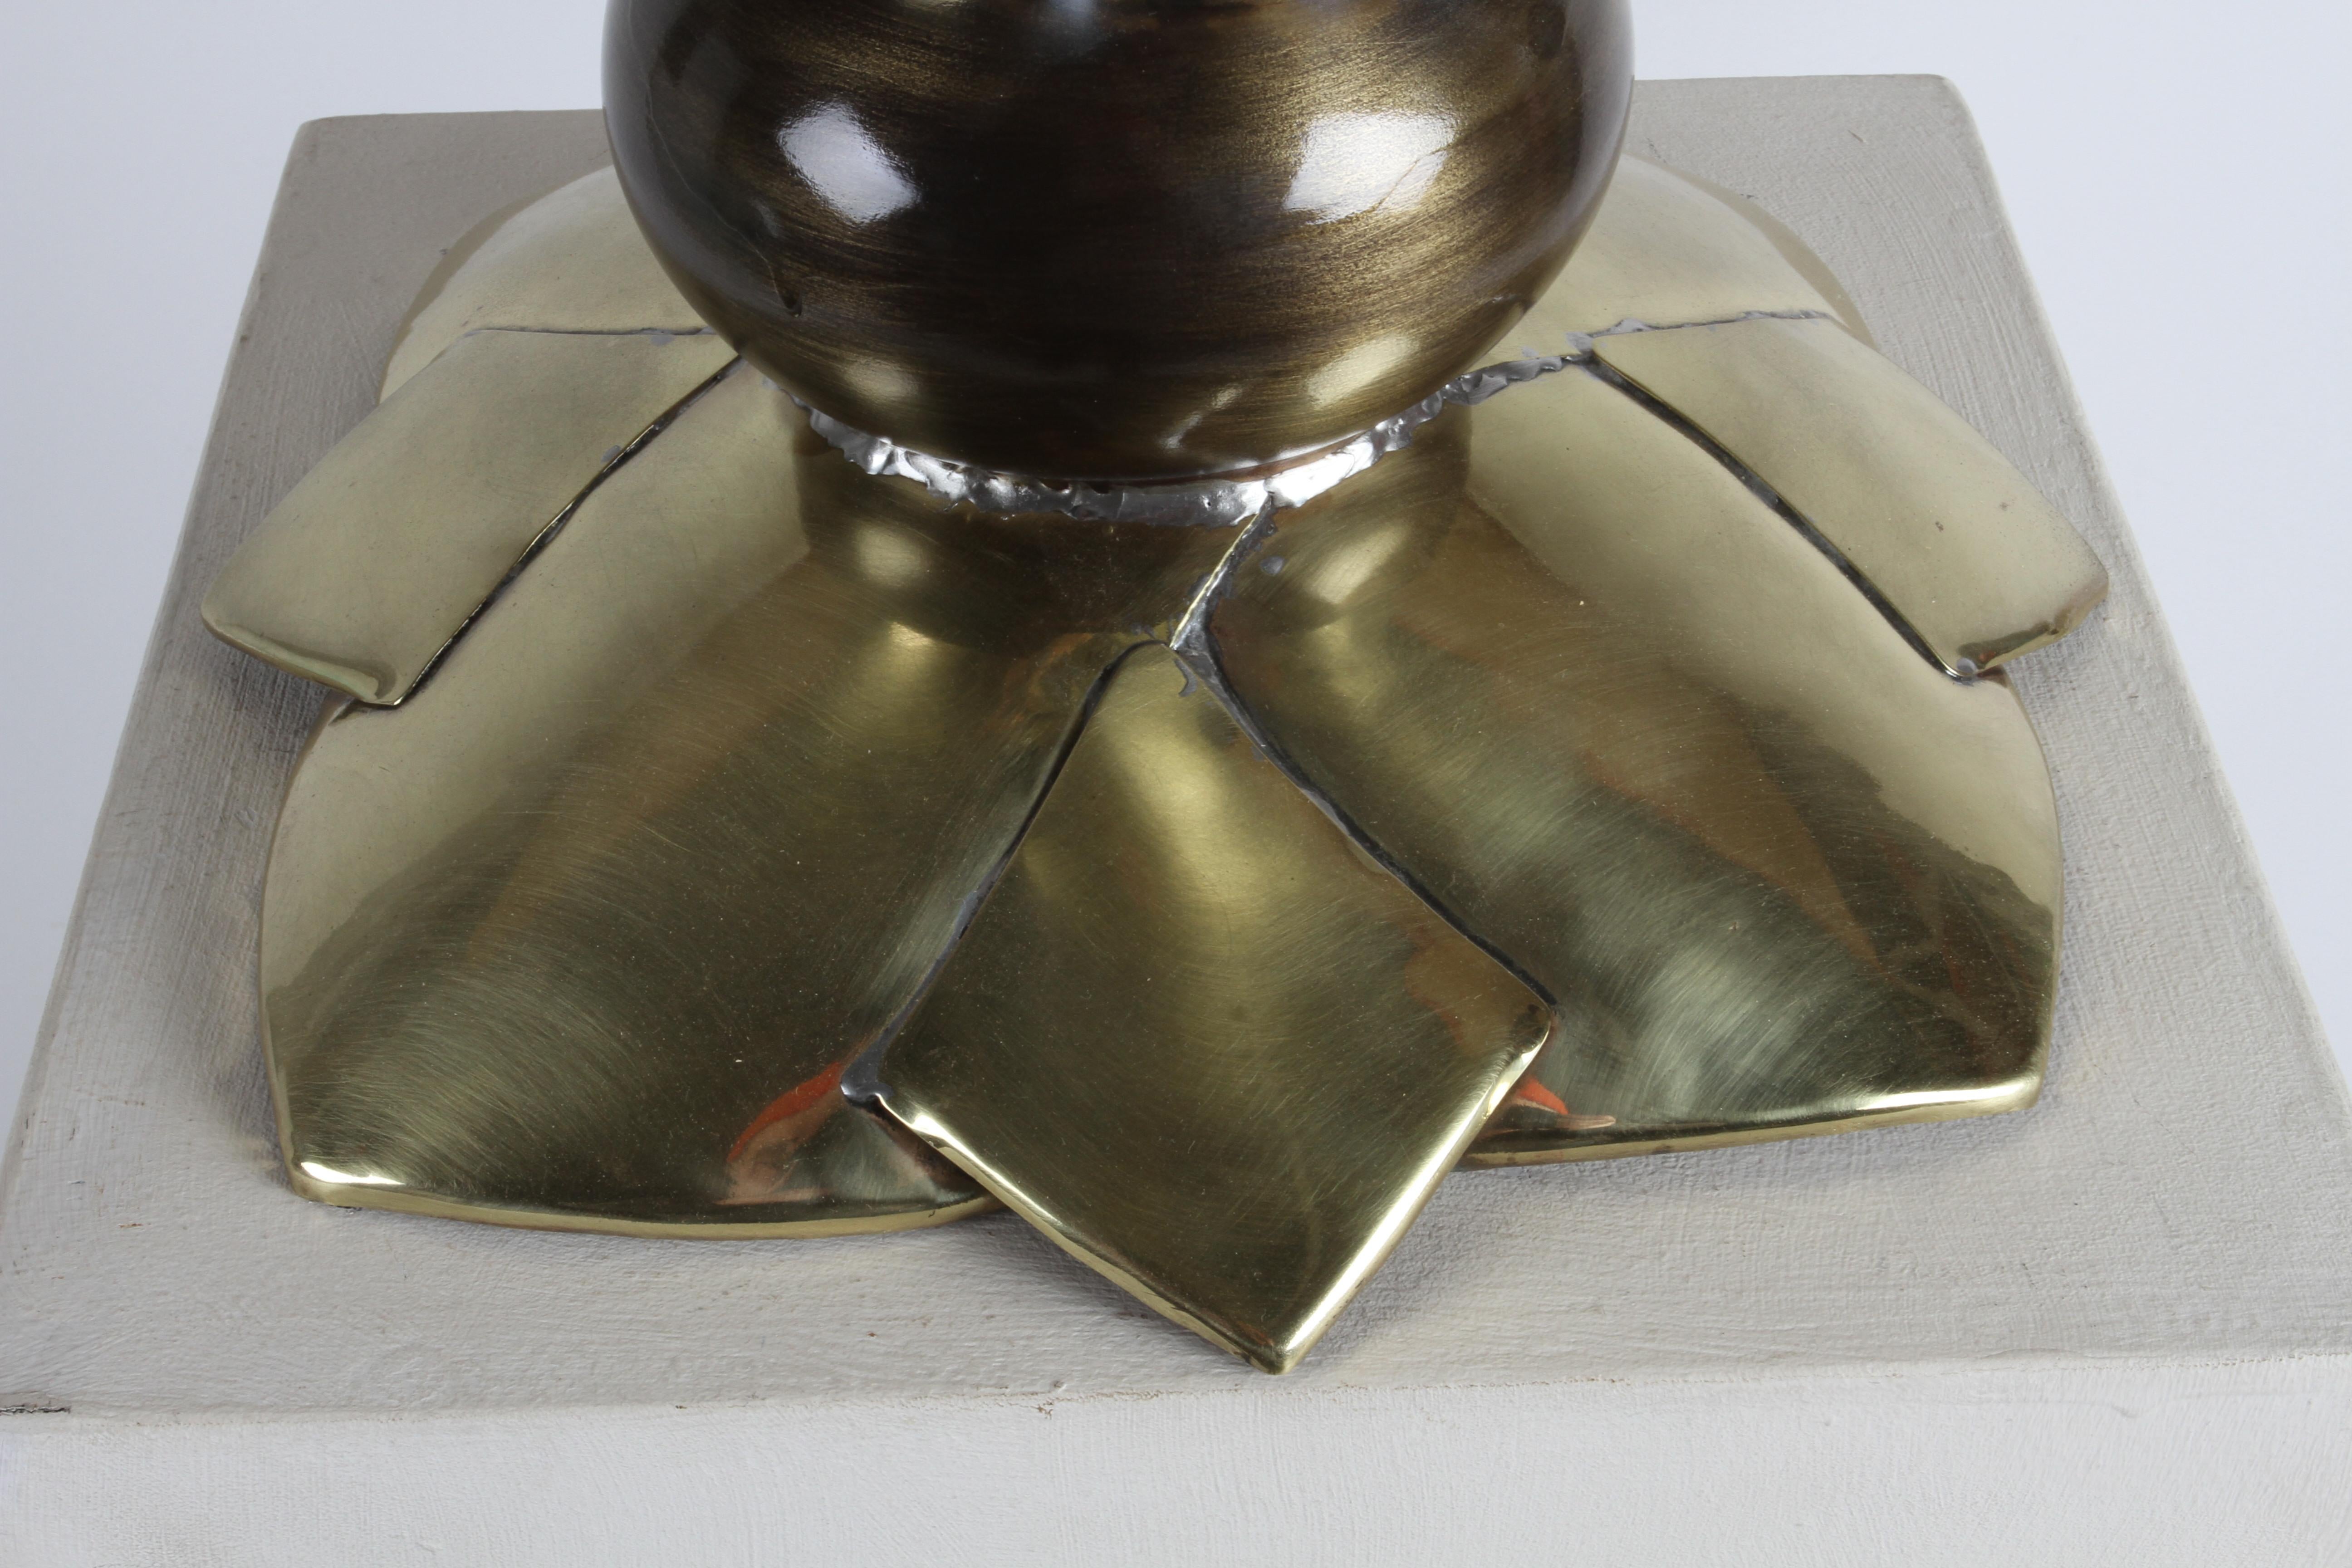 1980s Artisan Designed Brass Sculptural Lotus or Agave Form Table Lamp Torchiere For Sale 4